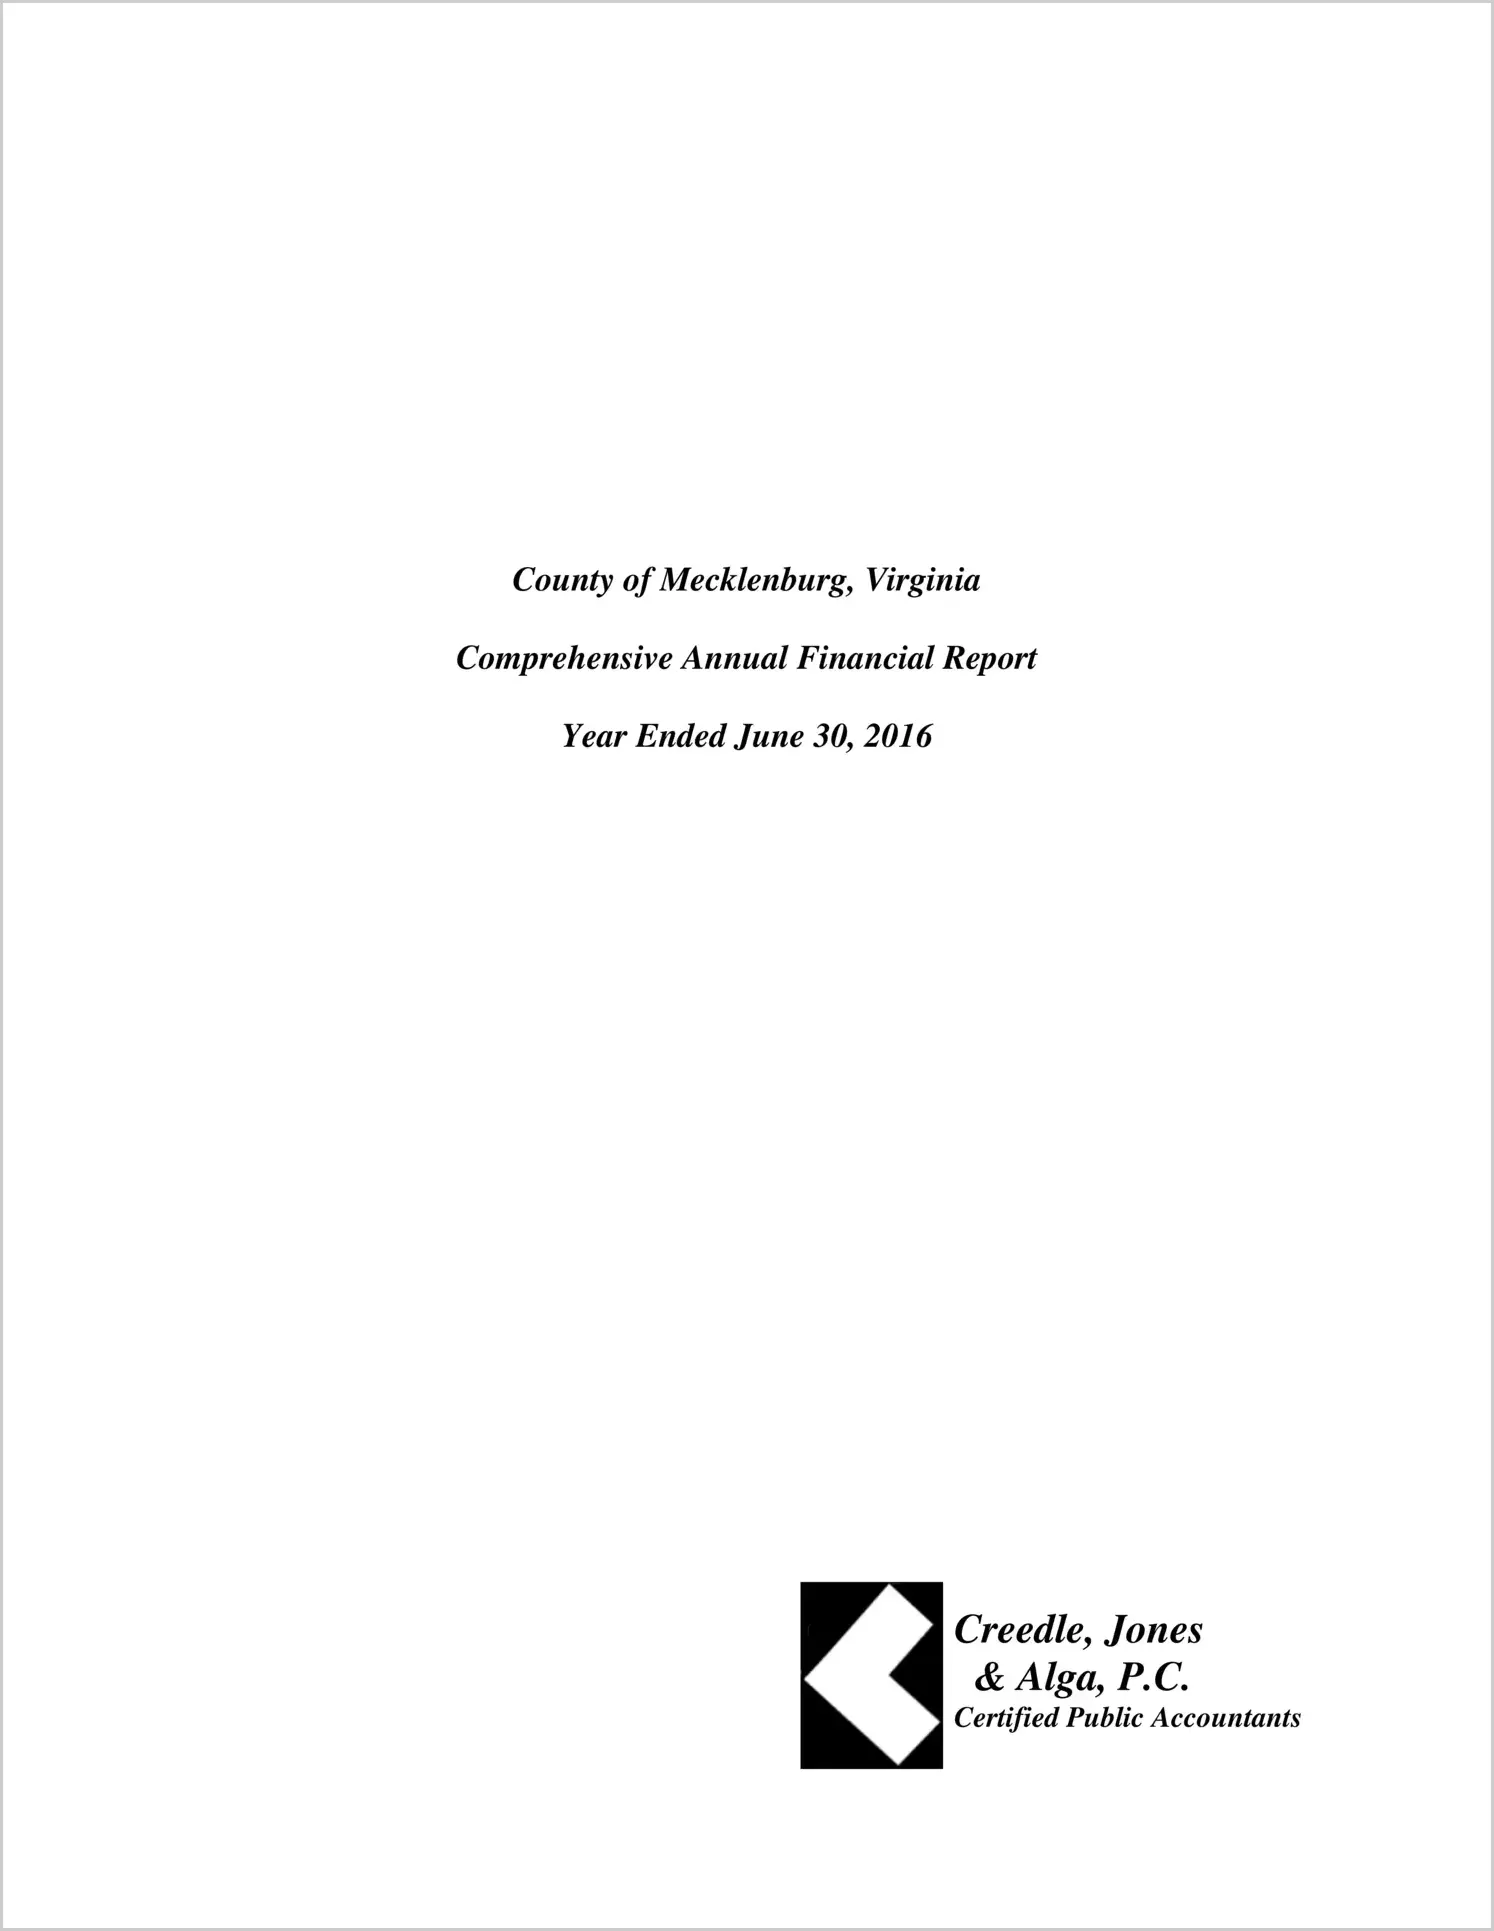 2016 Annual Financial Report for County of Mecklenburg